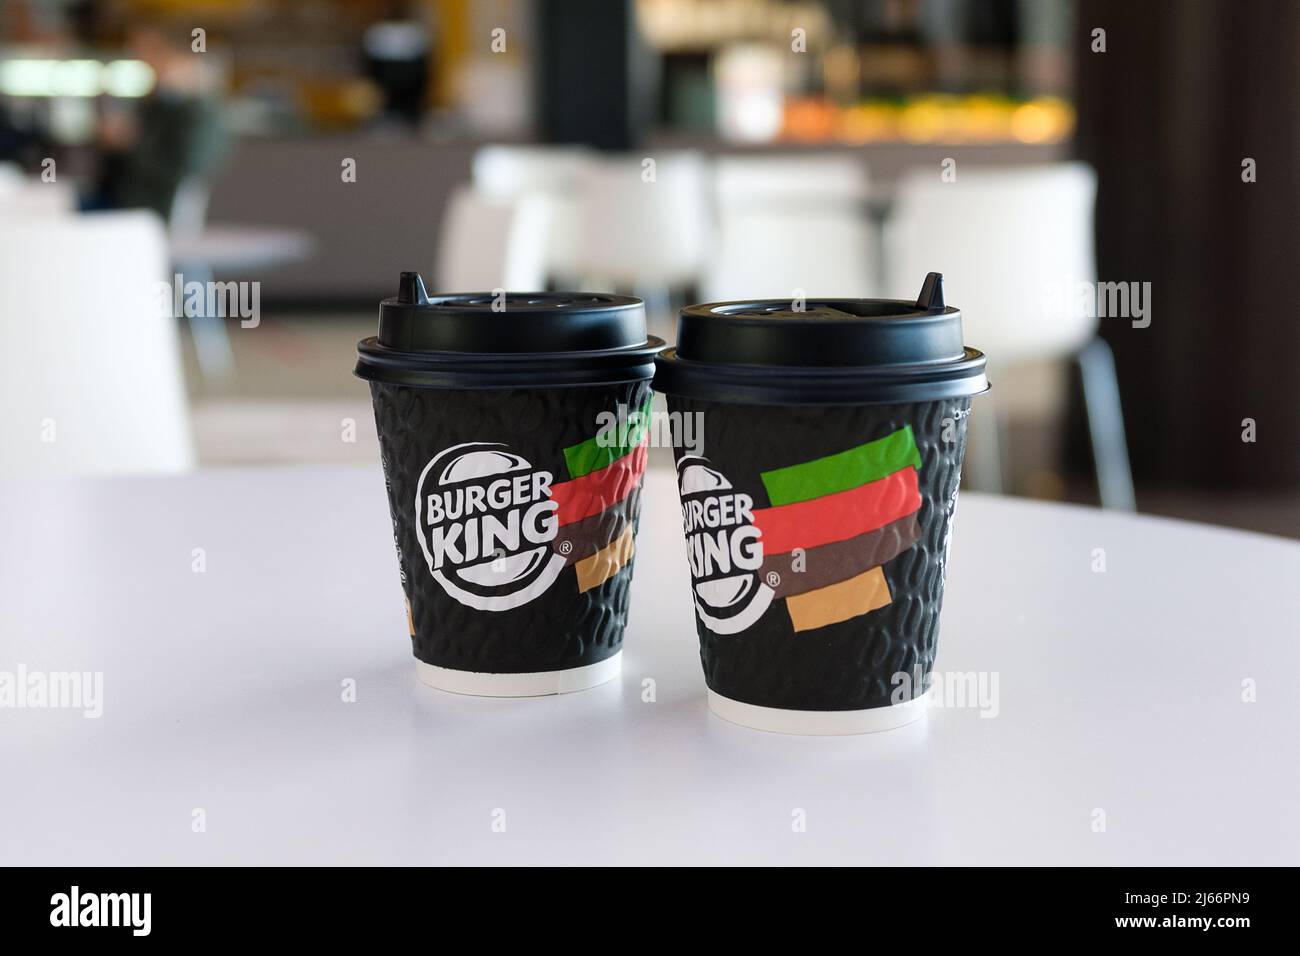 https://c8.alamy.com/comp/2J66PN9/russia-tyumen-october-10-2021-a-cup-of-burger-king-coffee-on-the-table-in-the-cafe-a-worldwide-fast-food-chain-drinks-in-disposable-cups-2J66PN9.jpg